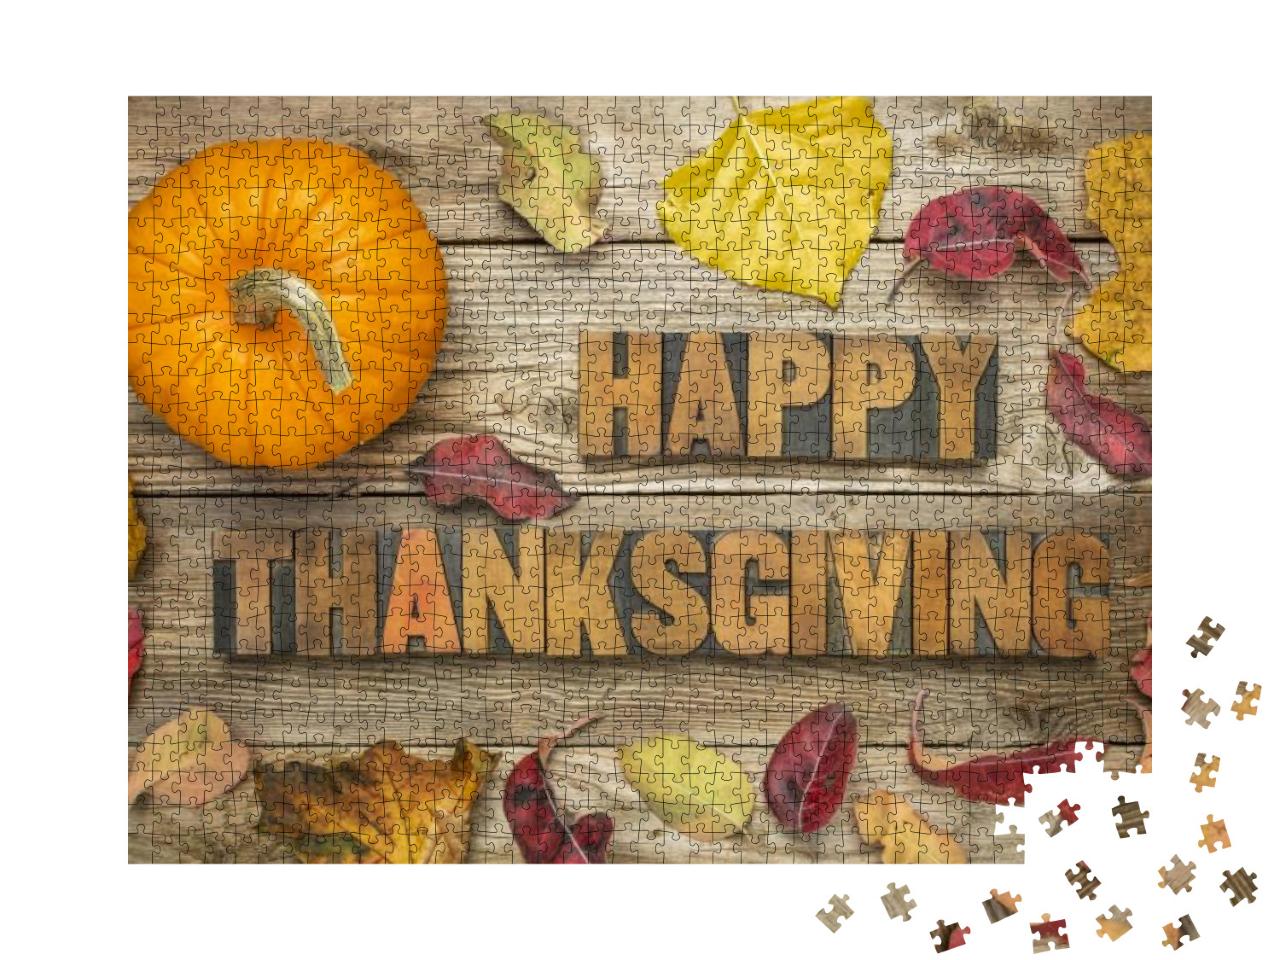 Happy Thanksgiving - Text in Vintage Letterpress Wood Typ... Jigsaw Puzzle with 1000 pieces